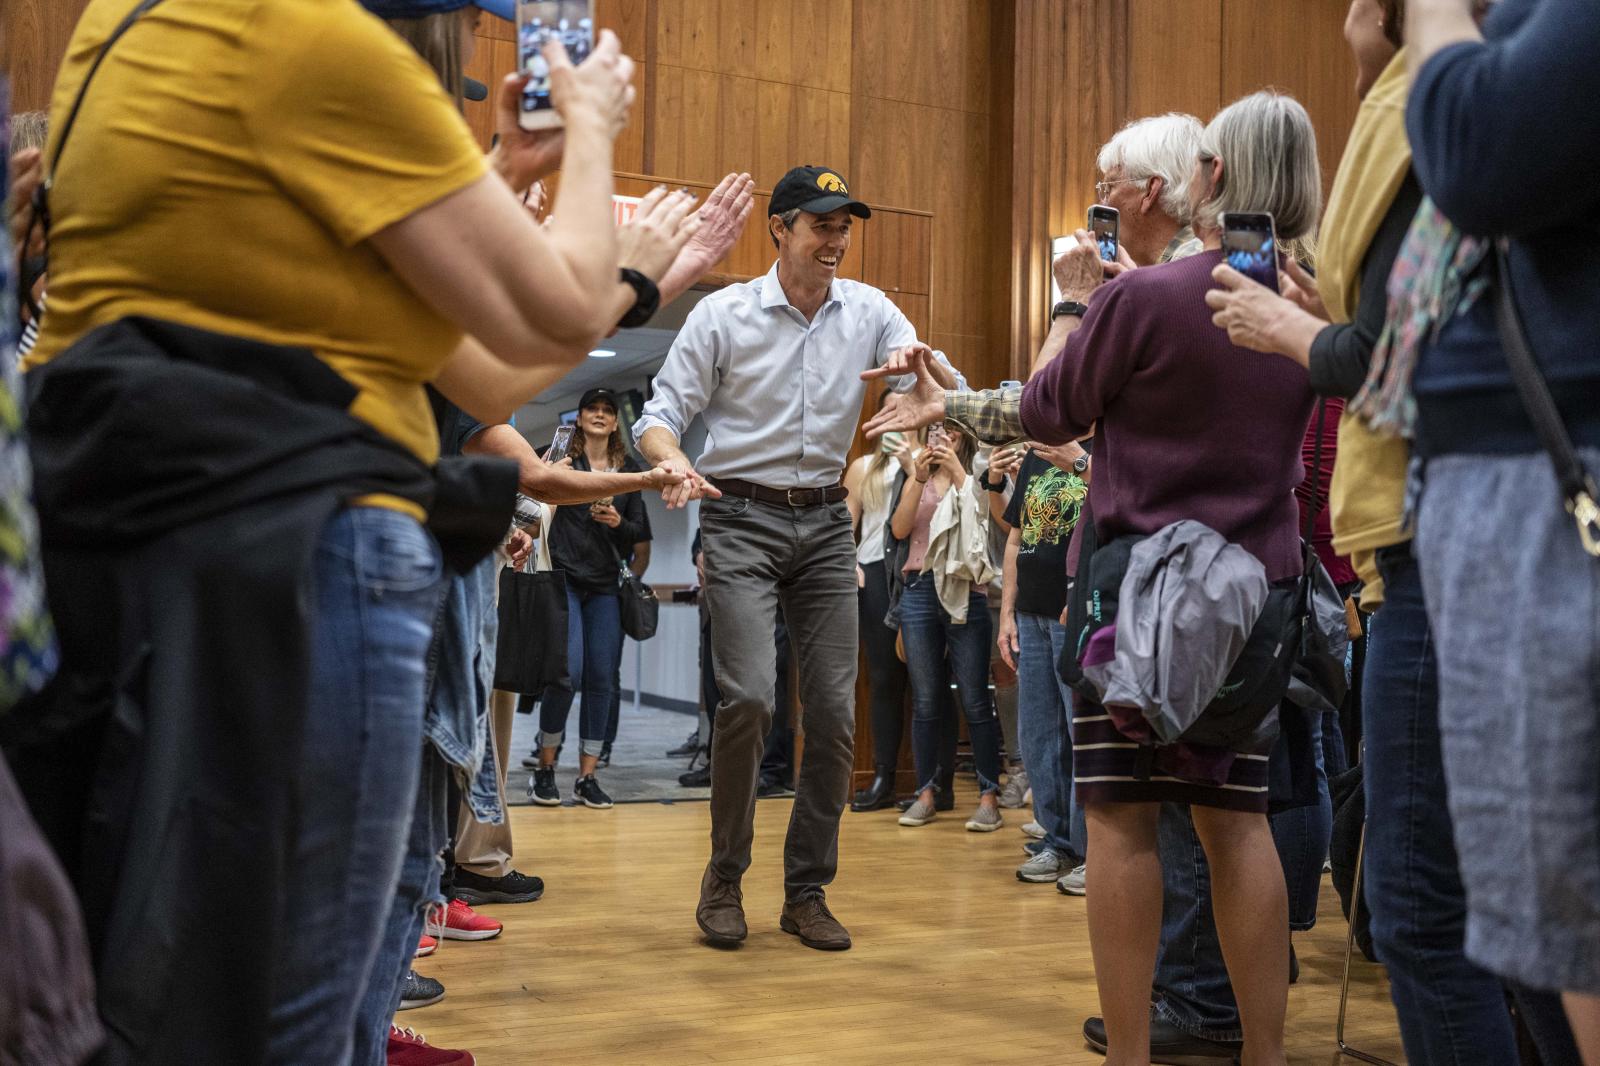 Image from Politics - BETO O'ROURKE arrives at the Iowa Memorial Union for a...